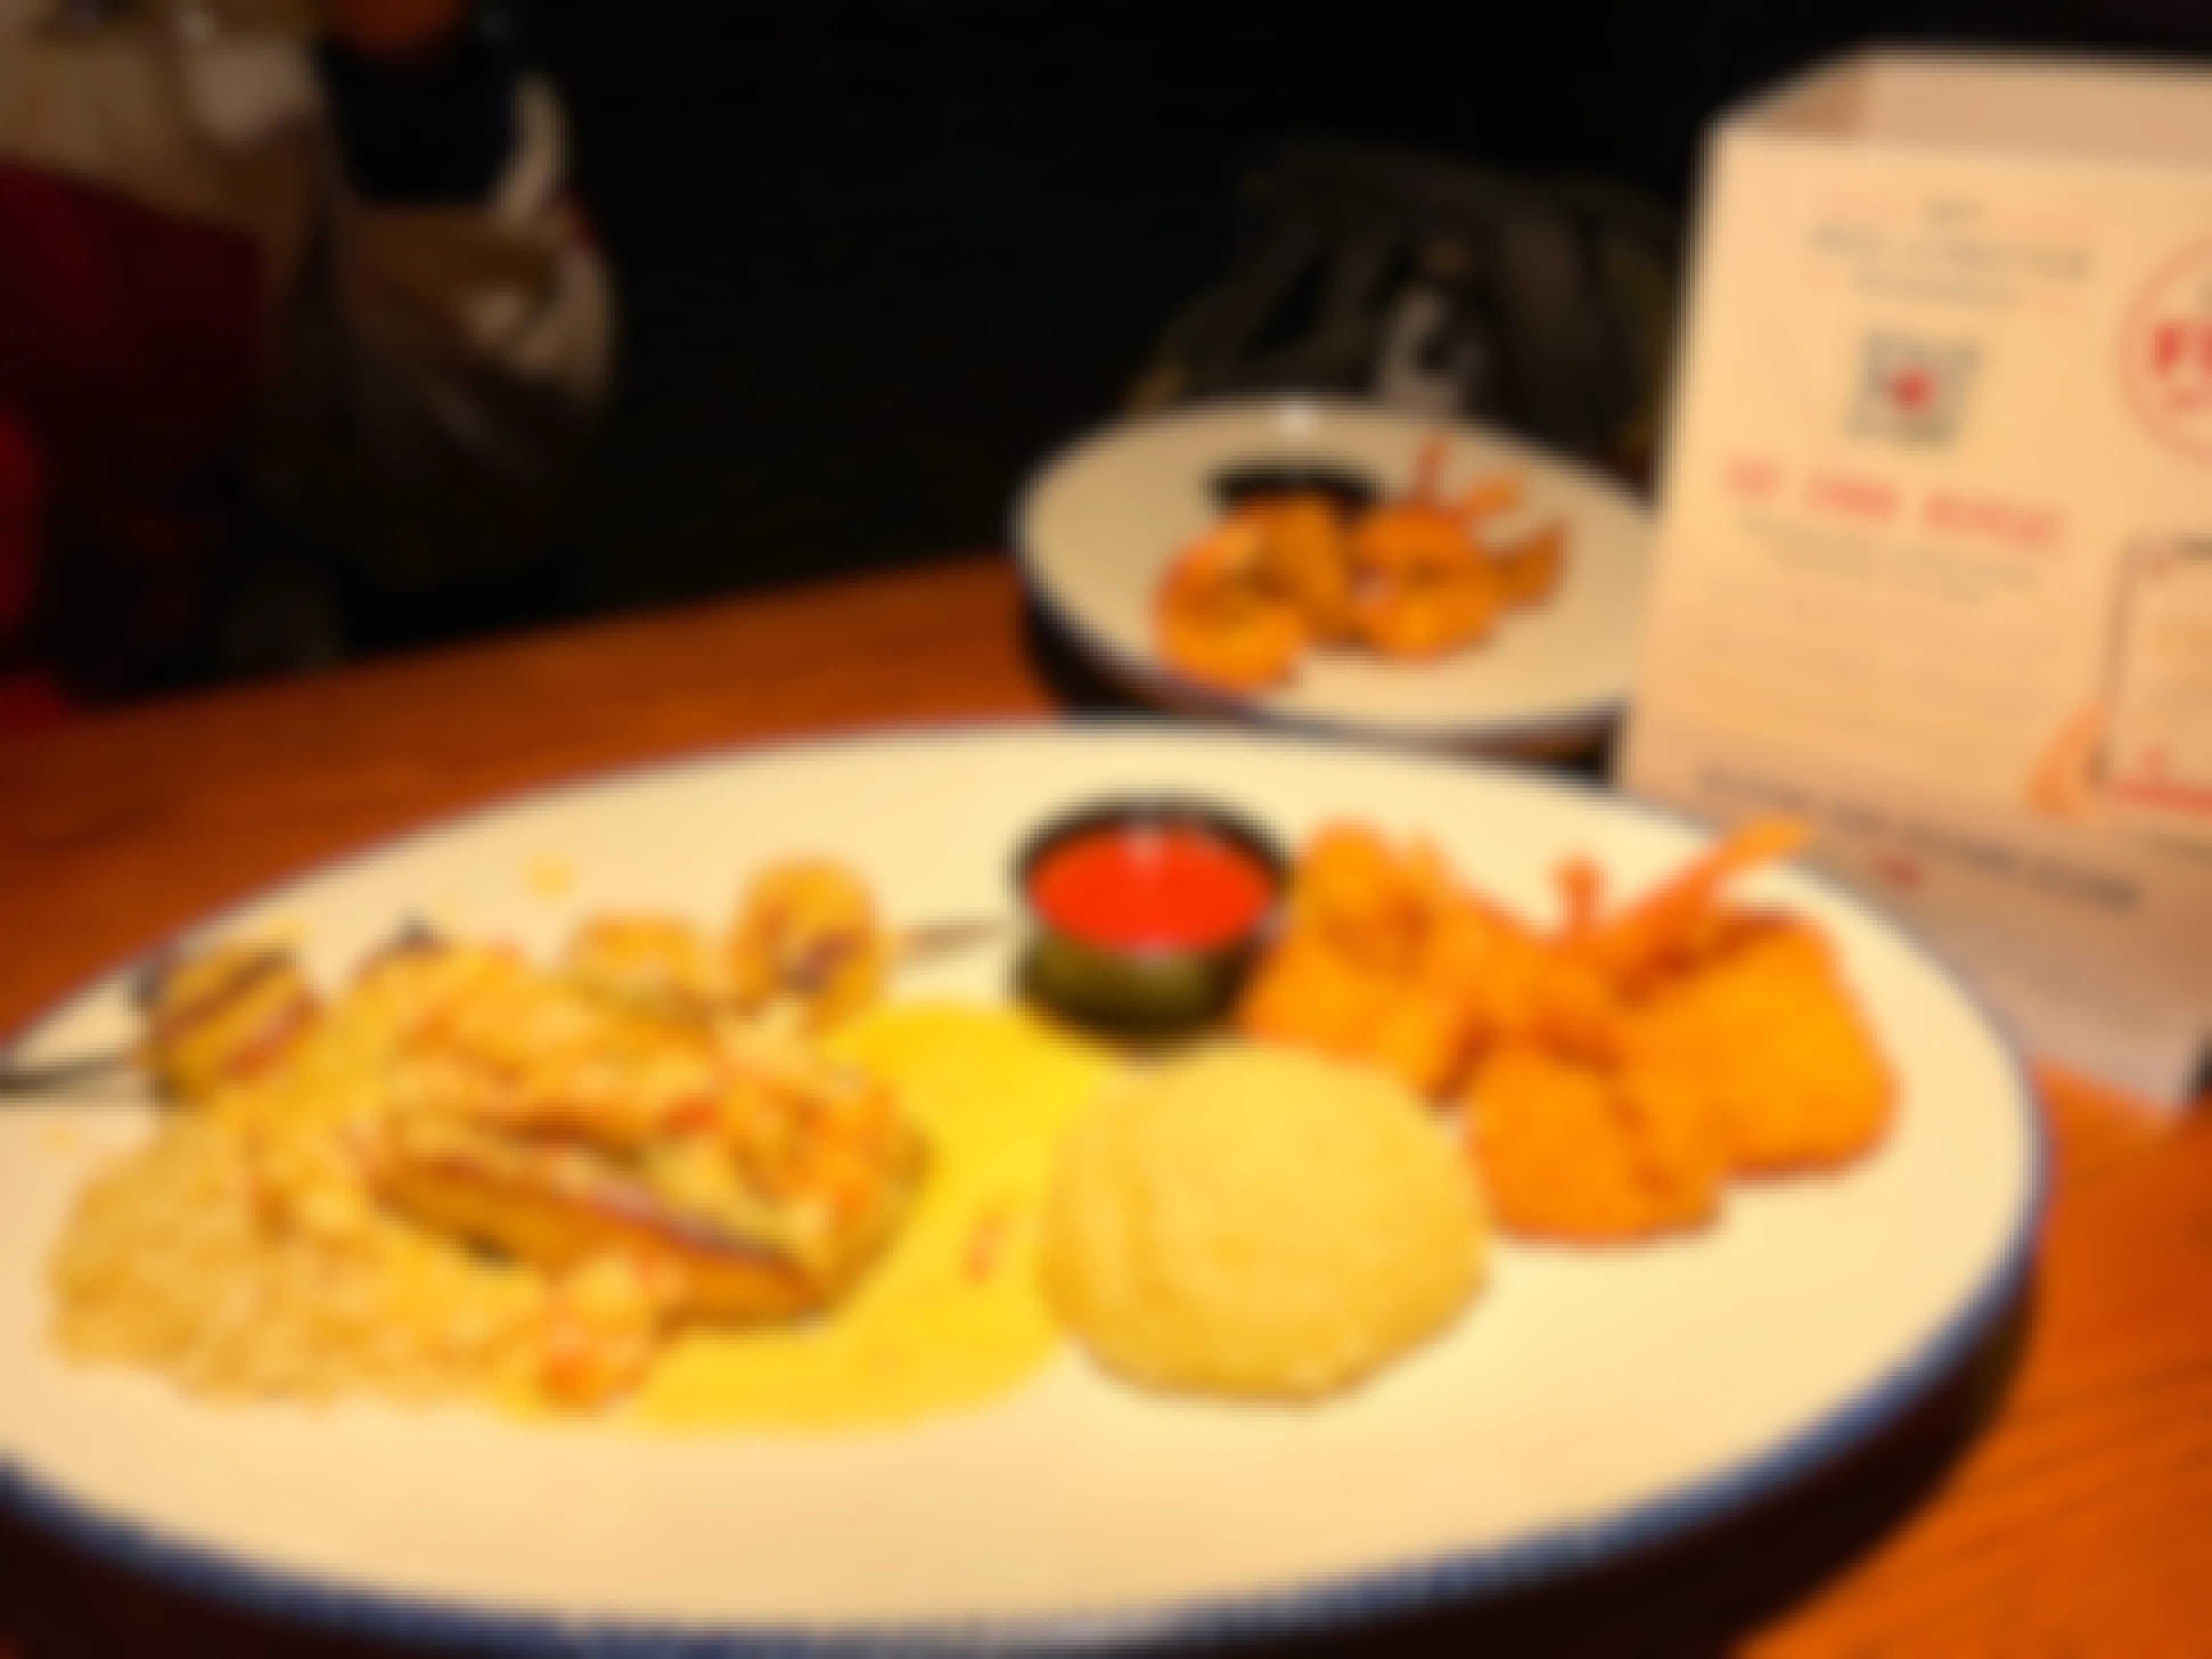 the mariner's feast on a plate at the table of a red lobster restaurant